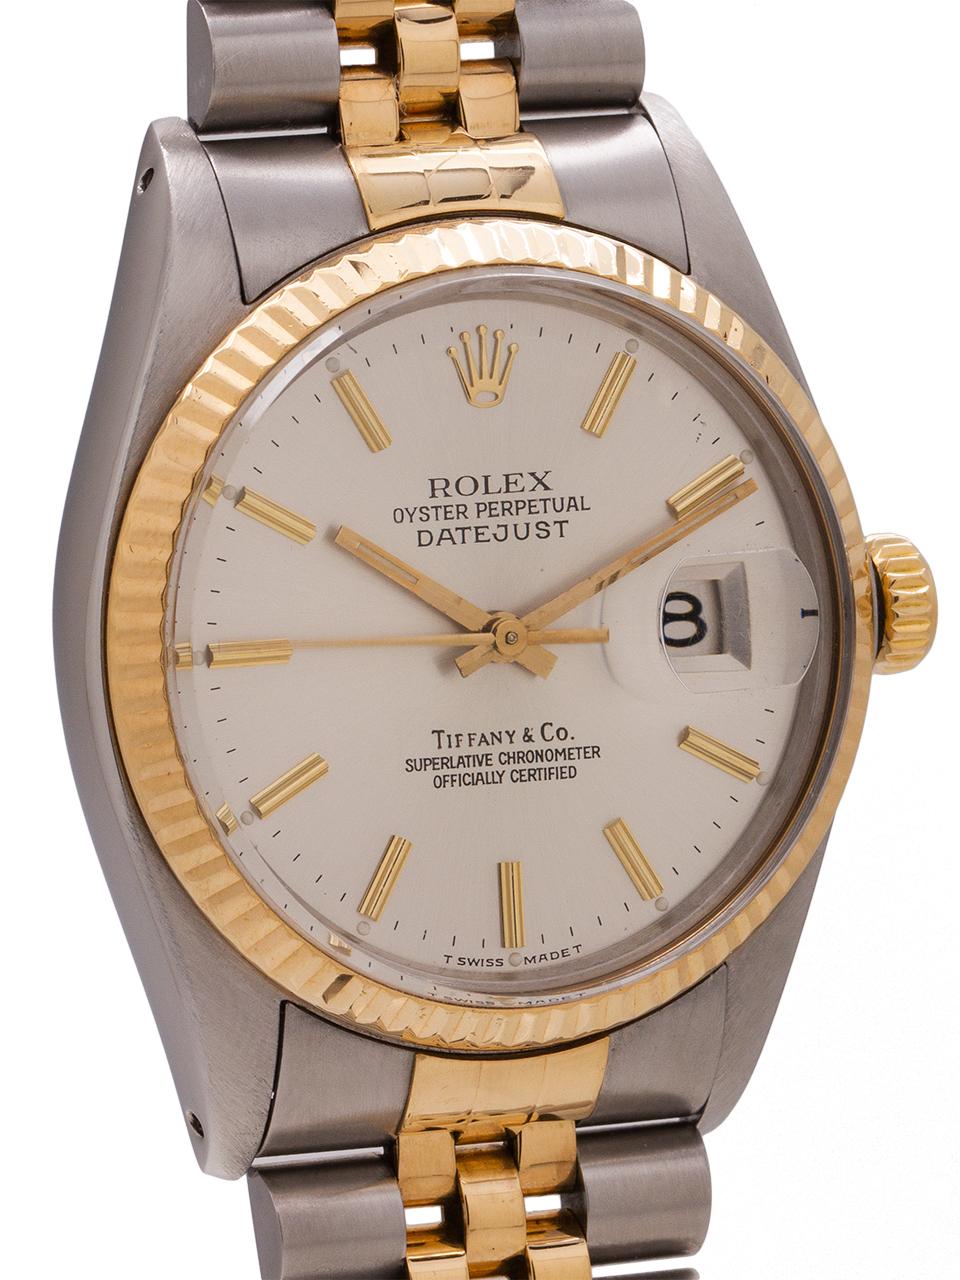 Rolex Datejust ref 16013 stainless steel and 18k yellow gold circa 1980 retailed by Tiffany & Co. Featuring full size man’s 36mm diameter case with 18K YG fluted bezel, acrylic crystal, and original silvered satin dial with applied gold indexes and